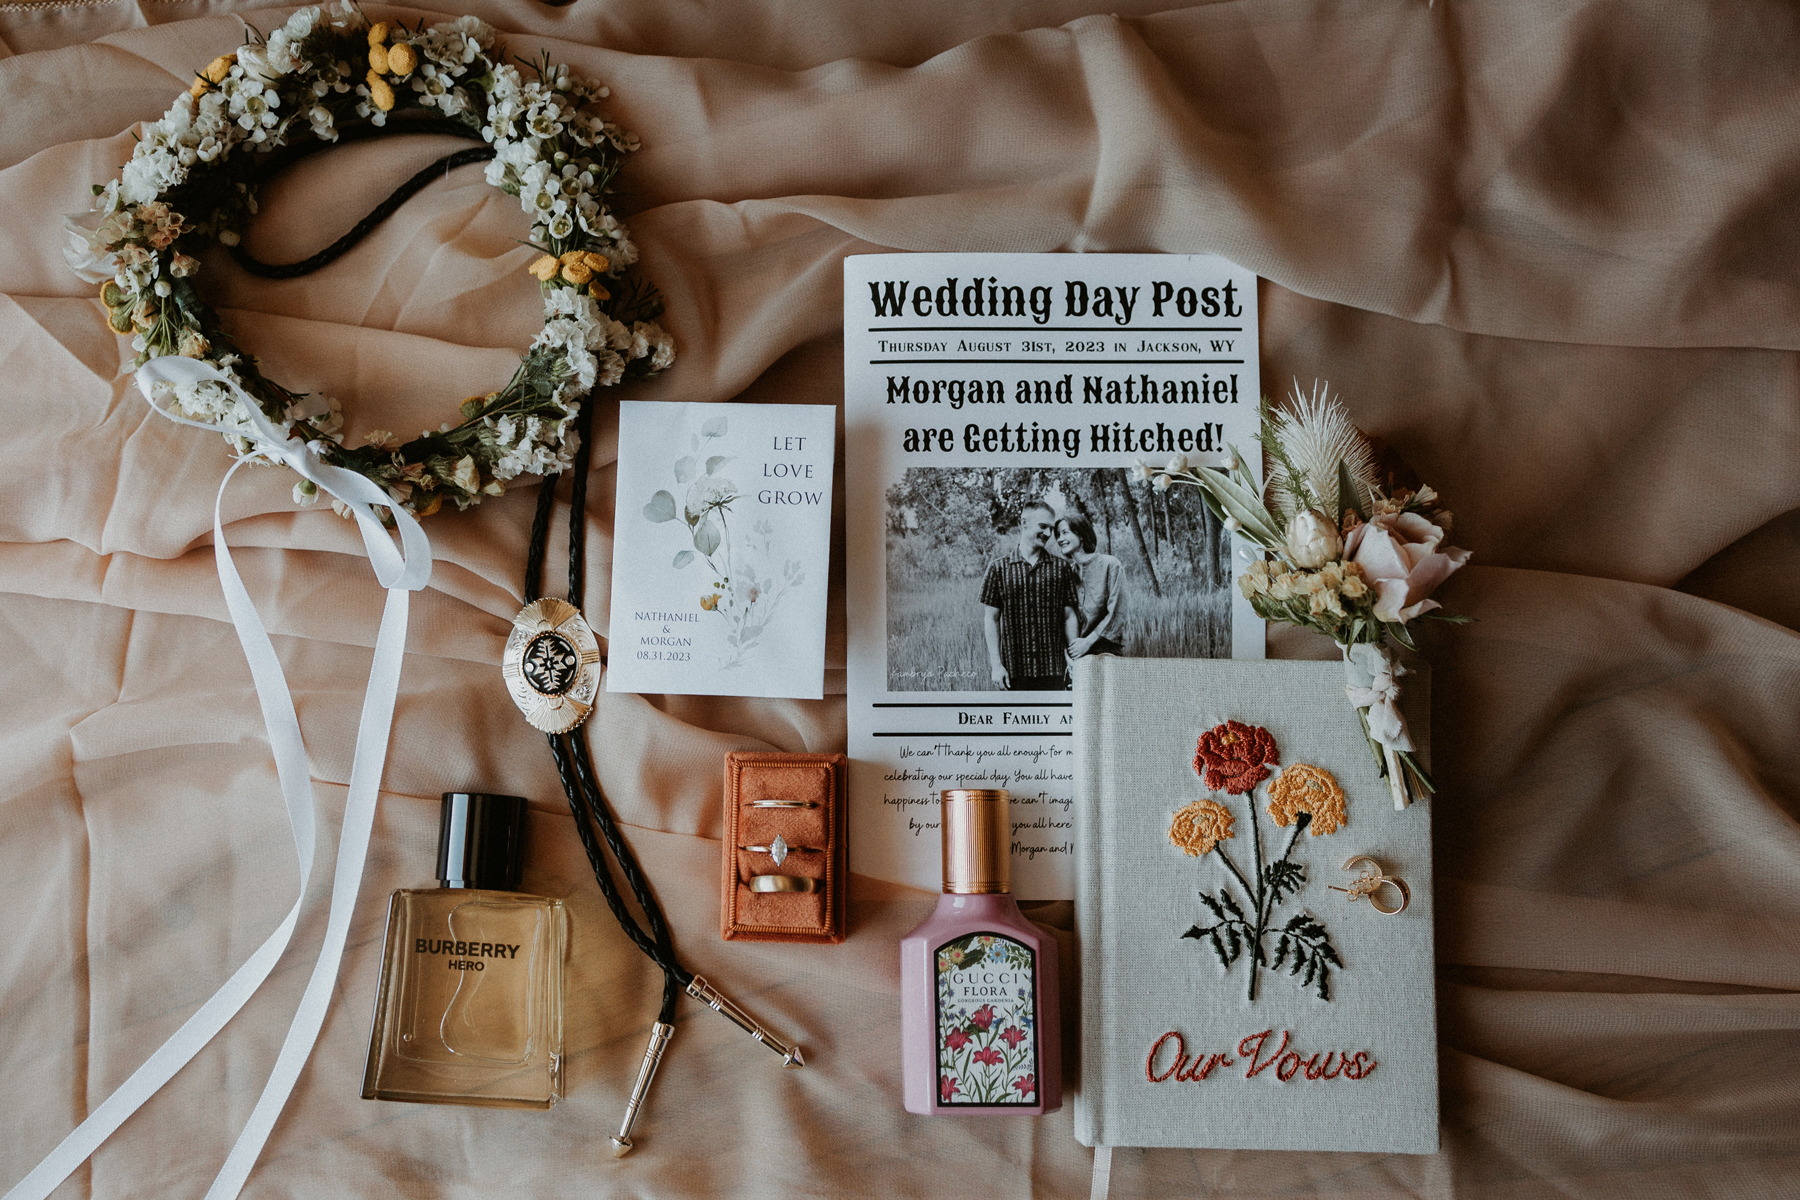 Six Things to Preserve From Your Wedding Day